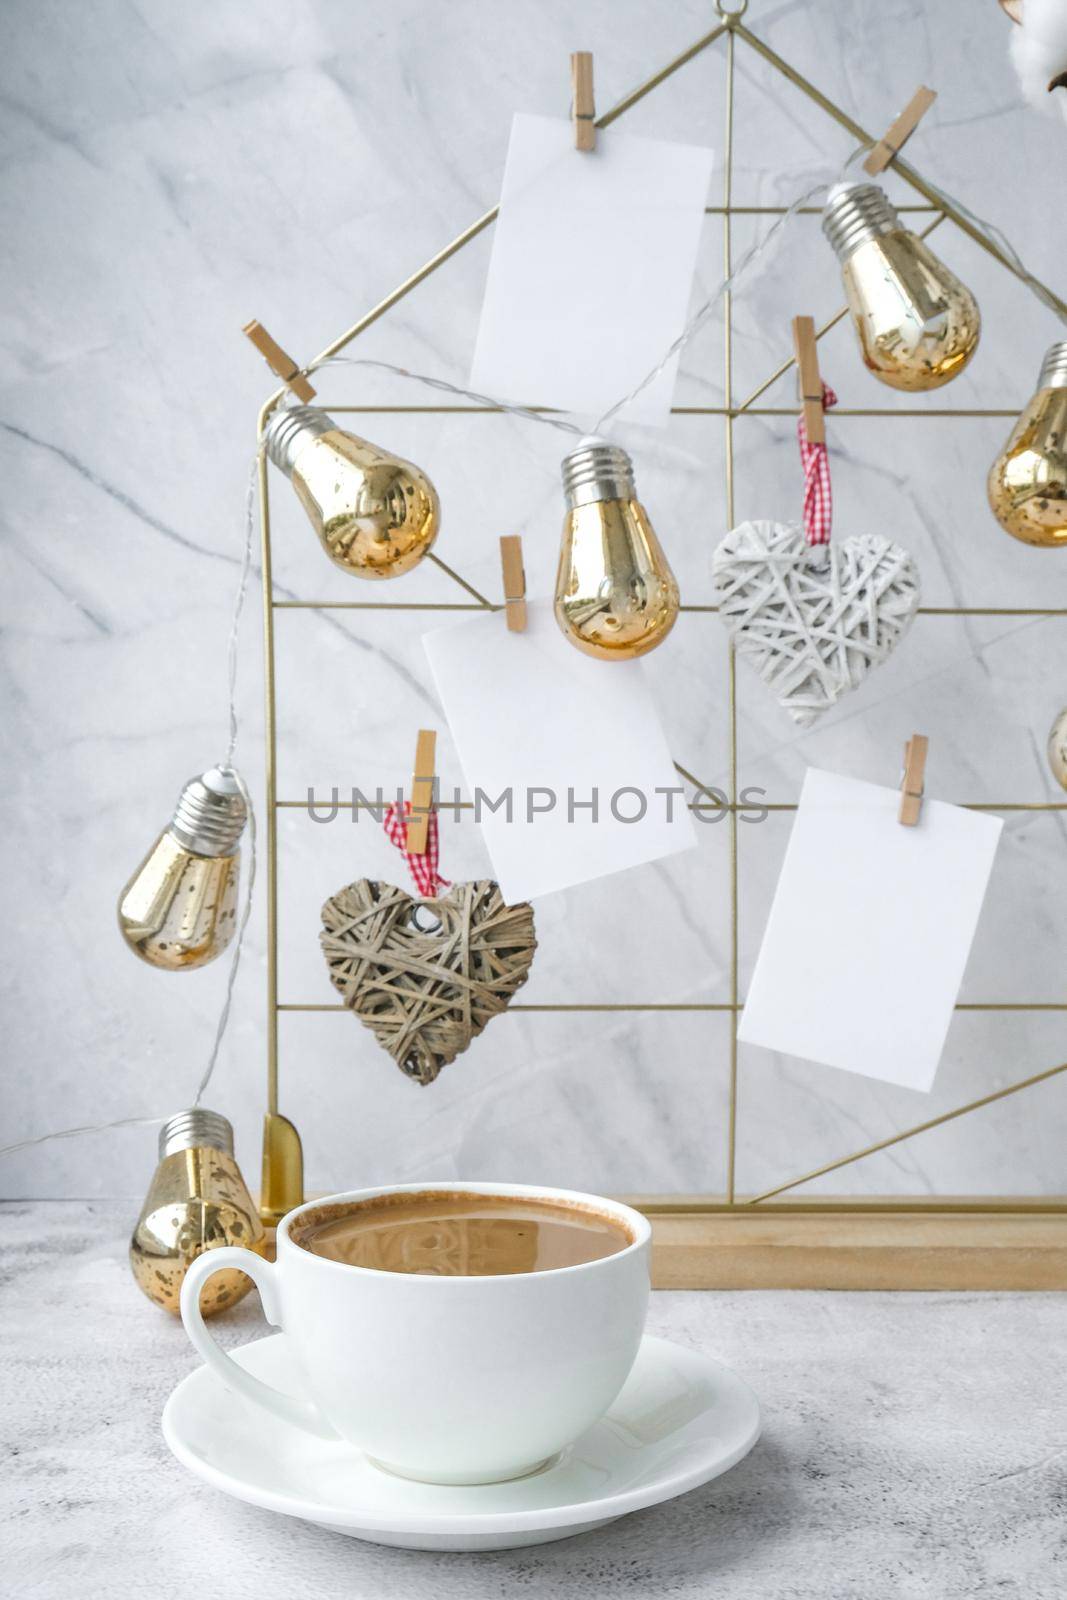 White home office room interior, bloggers workplace. Cup of coffee. Mood board with postcards and reminders mockup. Cotton branches in a vase, interior decoration. Feminine hipster office table decoration. Freelance workplace